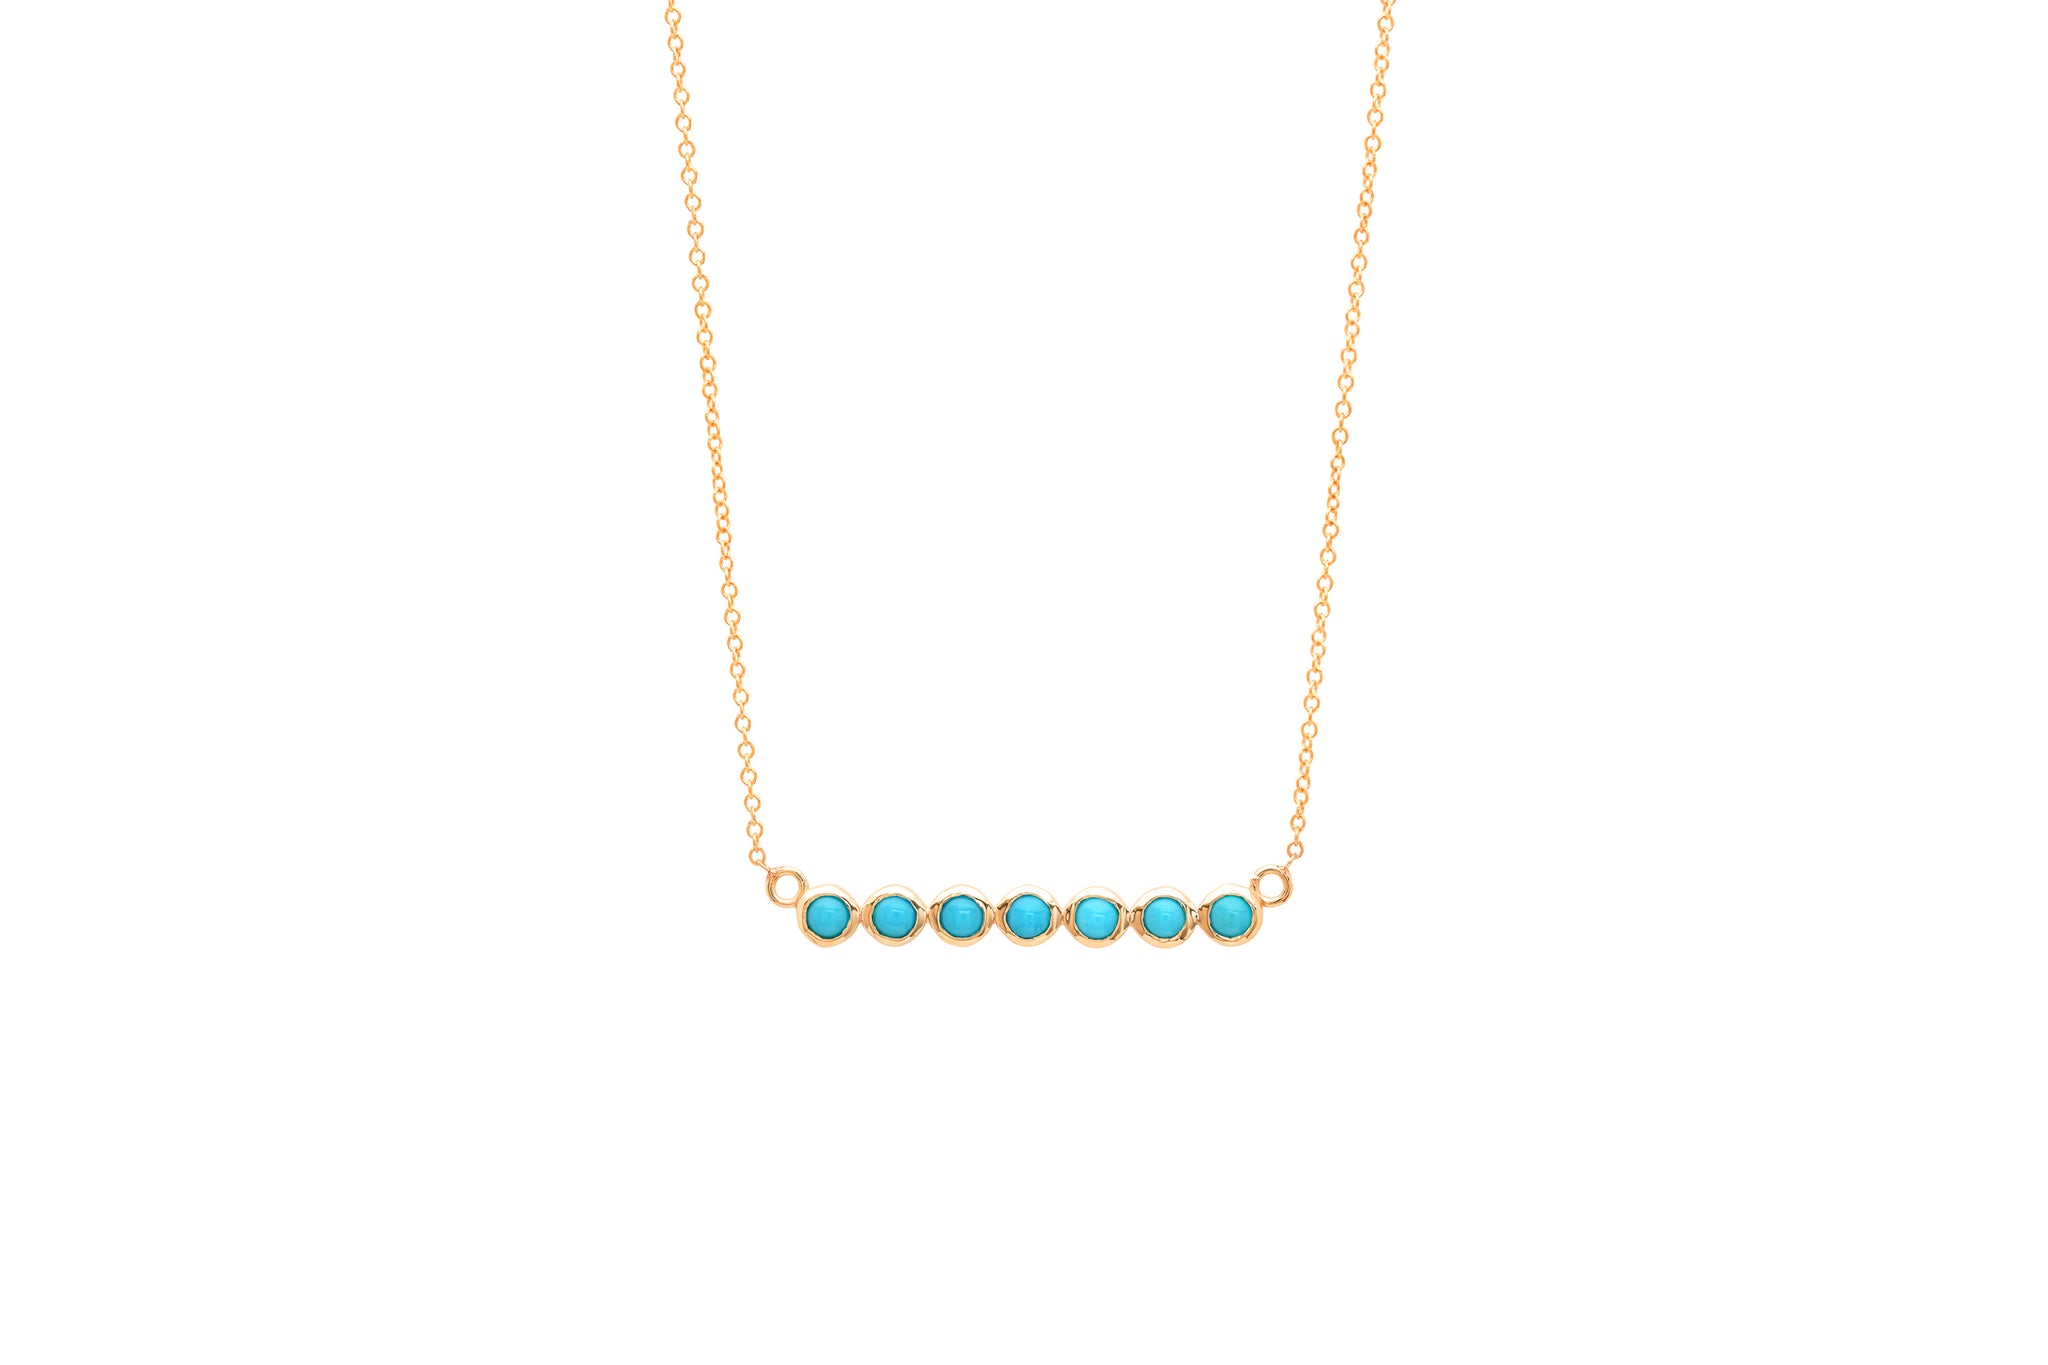 7 Turquoise Bar Necklace